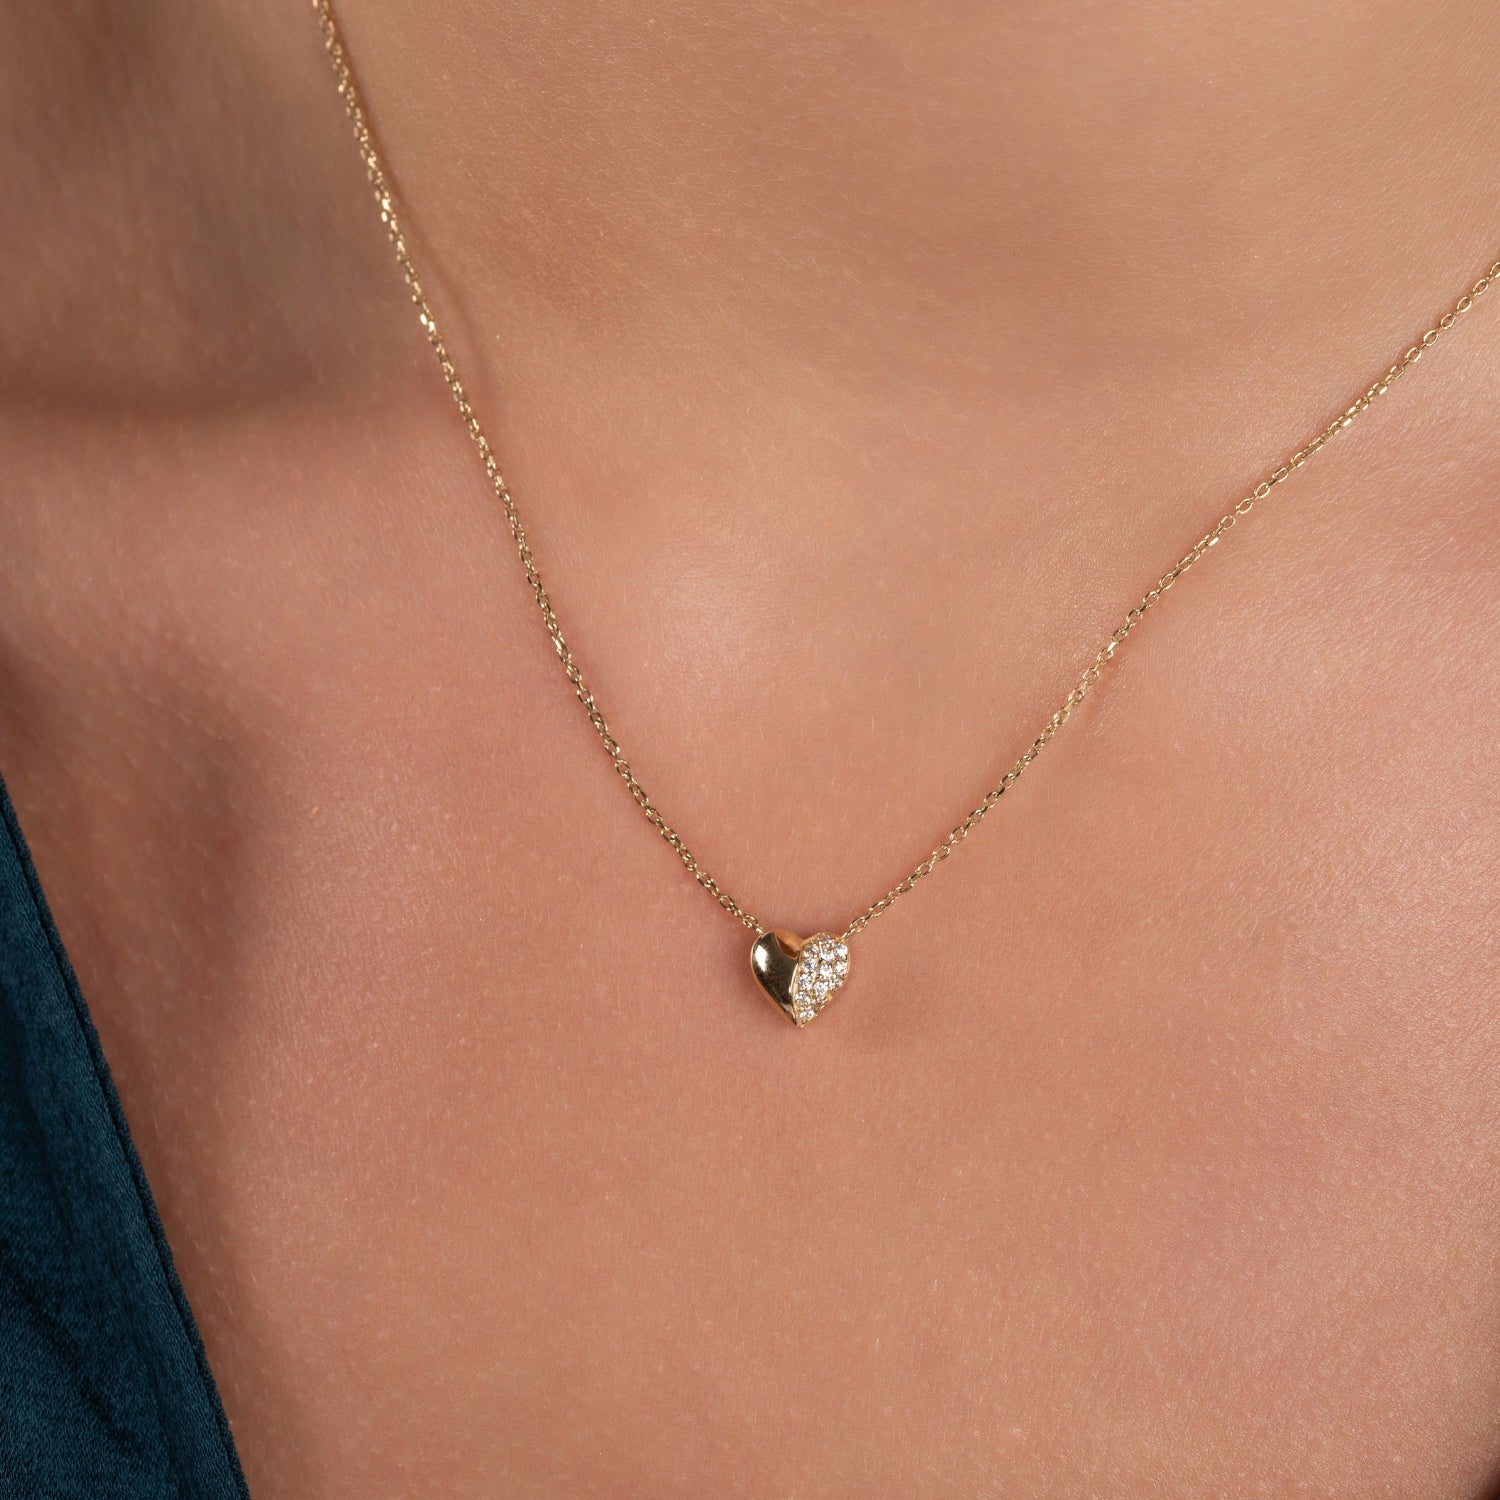 Small Heart Pave Diamond Necklace